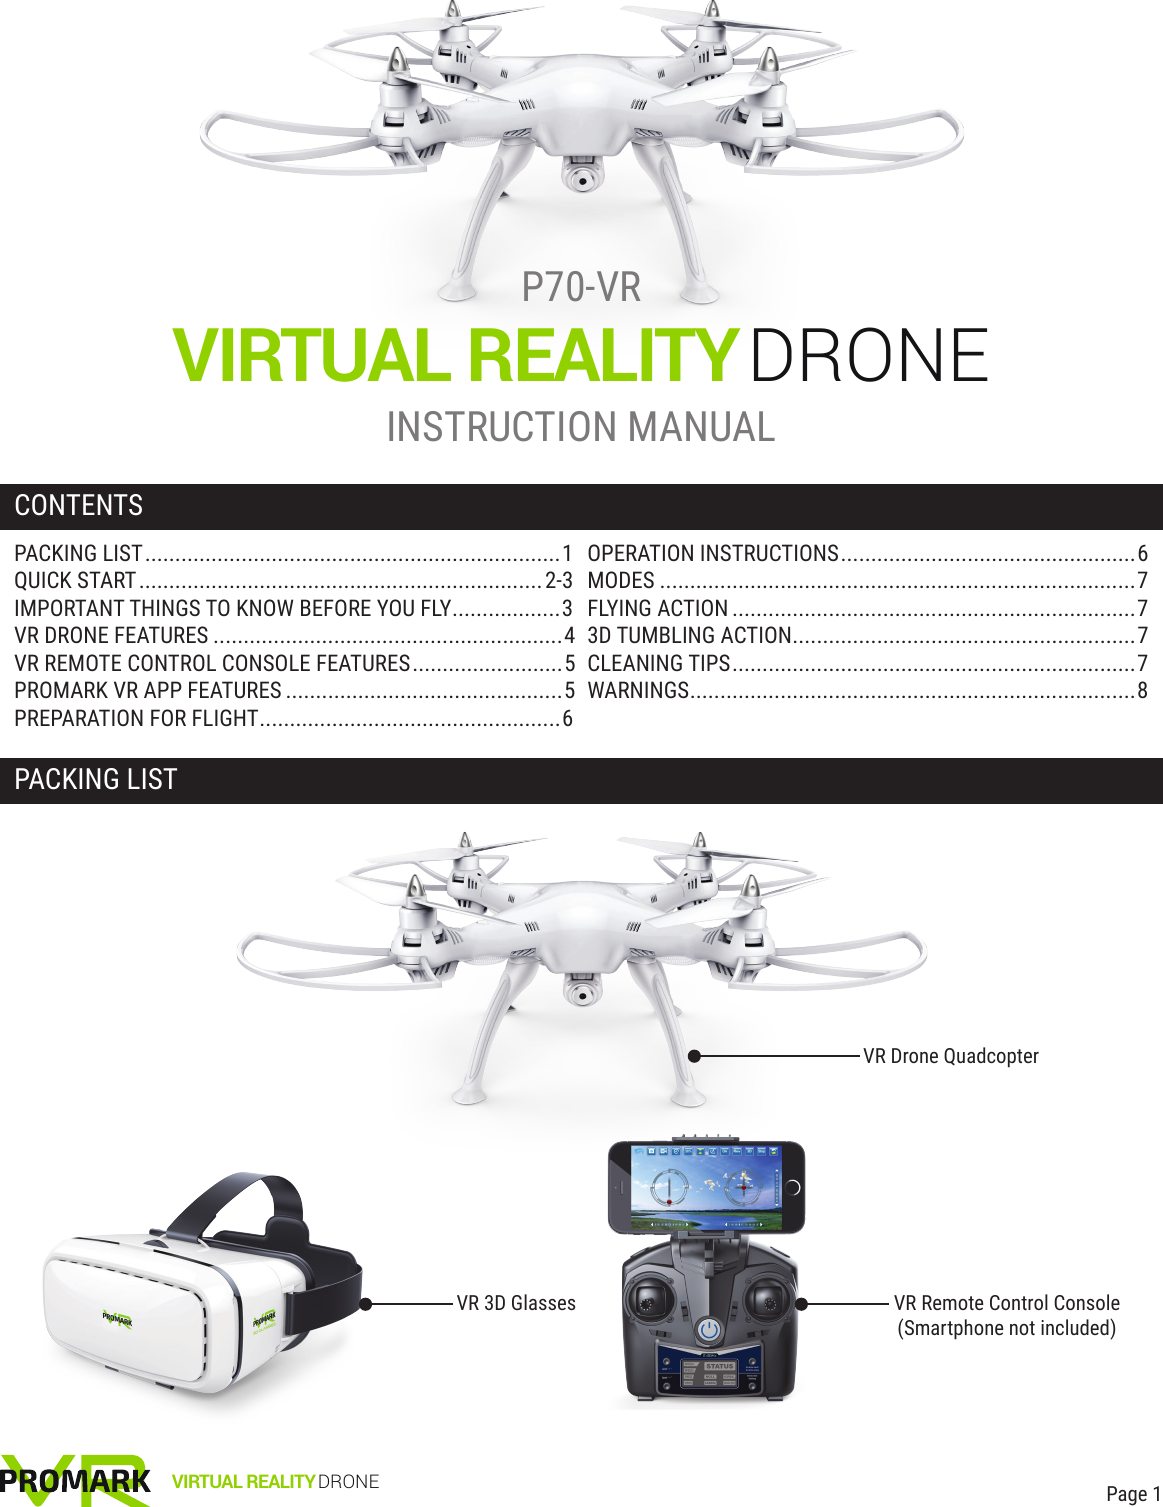 VIRTUAL REALITYDRONEPACKING LISTCONTENTSP70-VRINSTRUCTION MANUALVR Drone Quadcopter Page 1VR Remote Control Console(Smartphone not included)VR 3D GlassesVIRTUAL REALITY DRONEPACKING LIST.....................................................................1QUICK START...................................................................2-3IMPORTANT THINGS TO KNOW BEFORE YOU FLY..................3VR DRONE FEATURES ..........................................................4VR REMOTE CONTROL CONSOLE FEATURES.........................5PROMARK VR APP FEATURES ..............................................5PREPARATION FOR FLIGHT..................................................6OPERATION INSTRUCTIONS.................................................6MODES ...............................................................................7FLYING ACTION ...................................................................73D TUMBLING ACTION.........................................................7CLEANING TIPS...................................................................7WARNINGS..........................................................................8